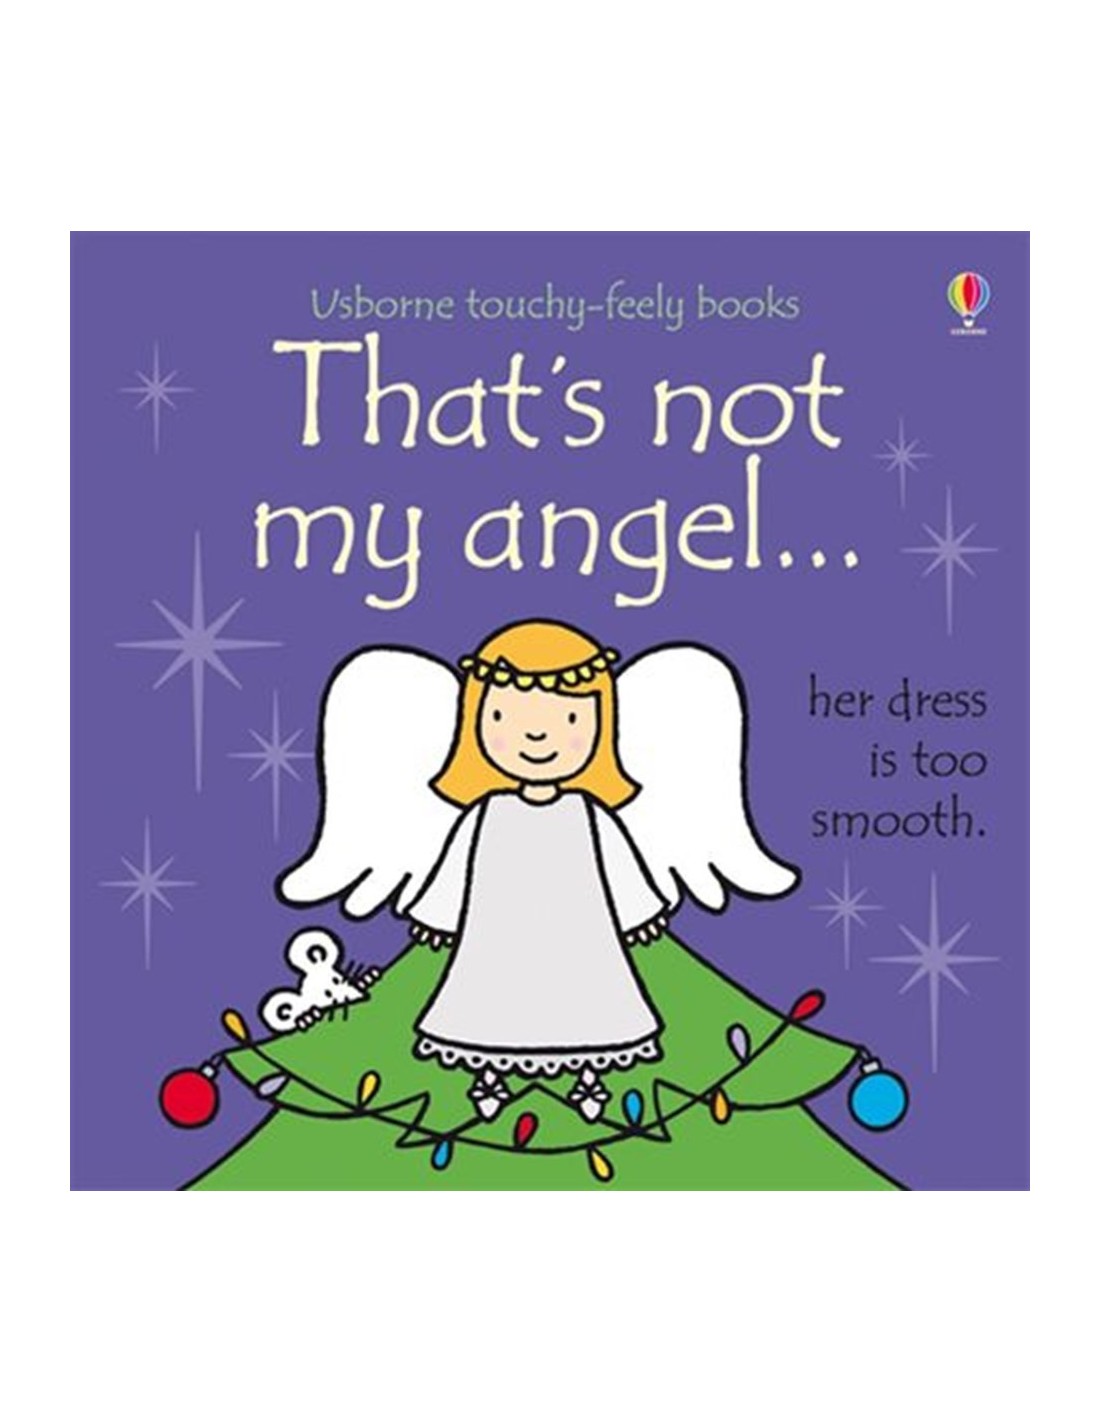 That's not my angel...